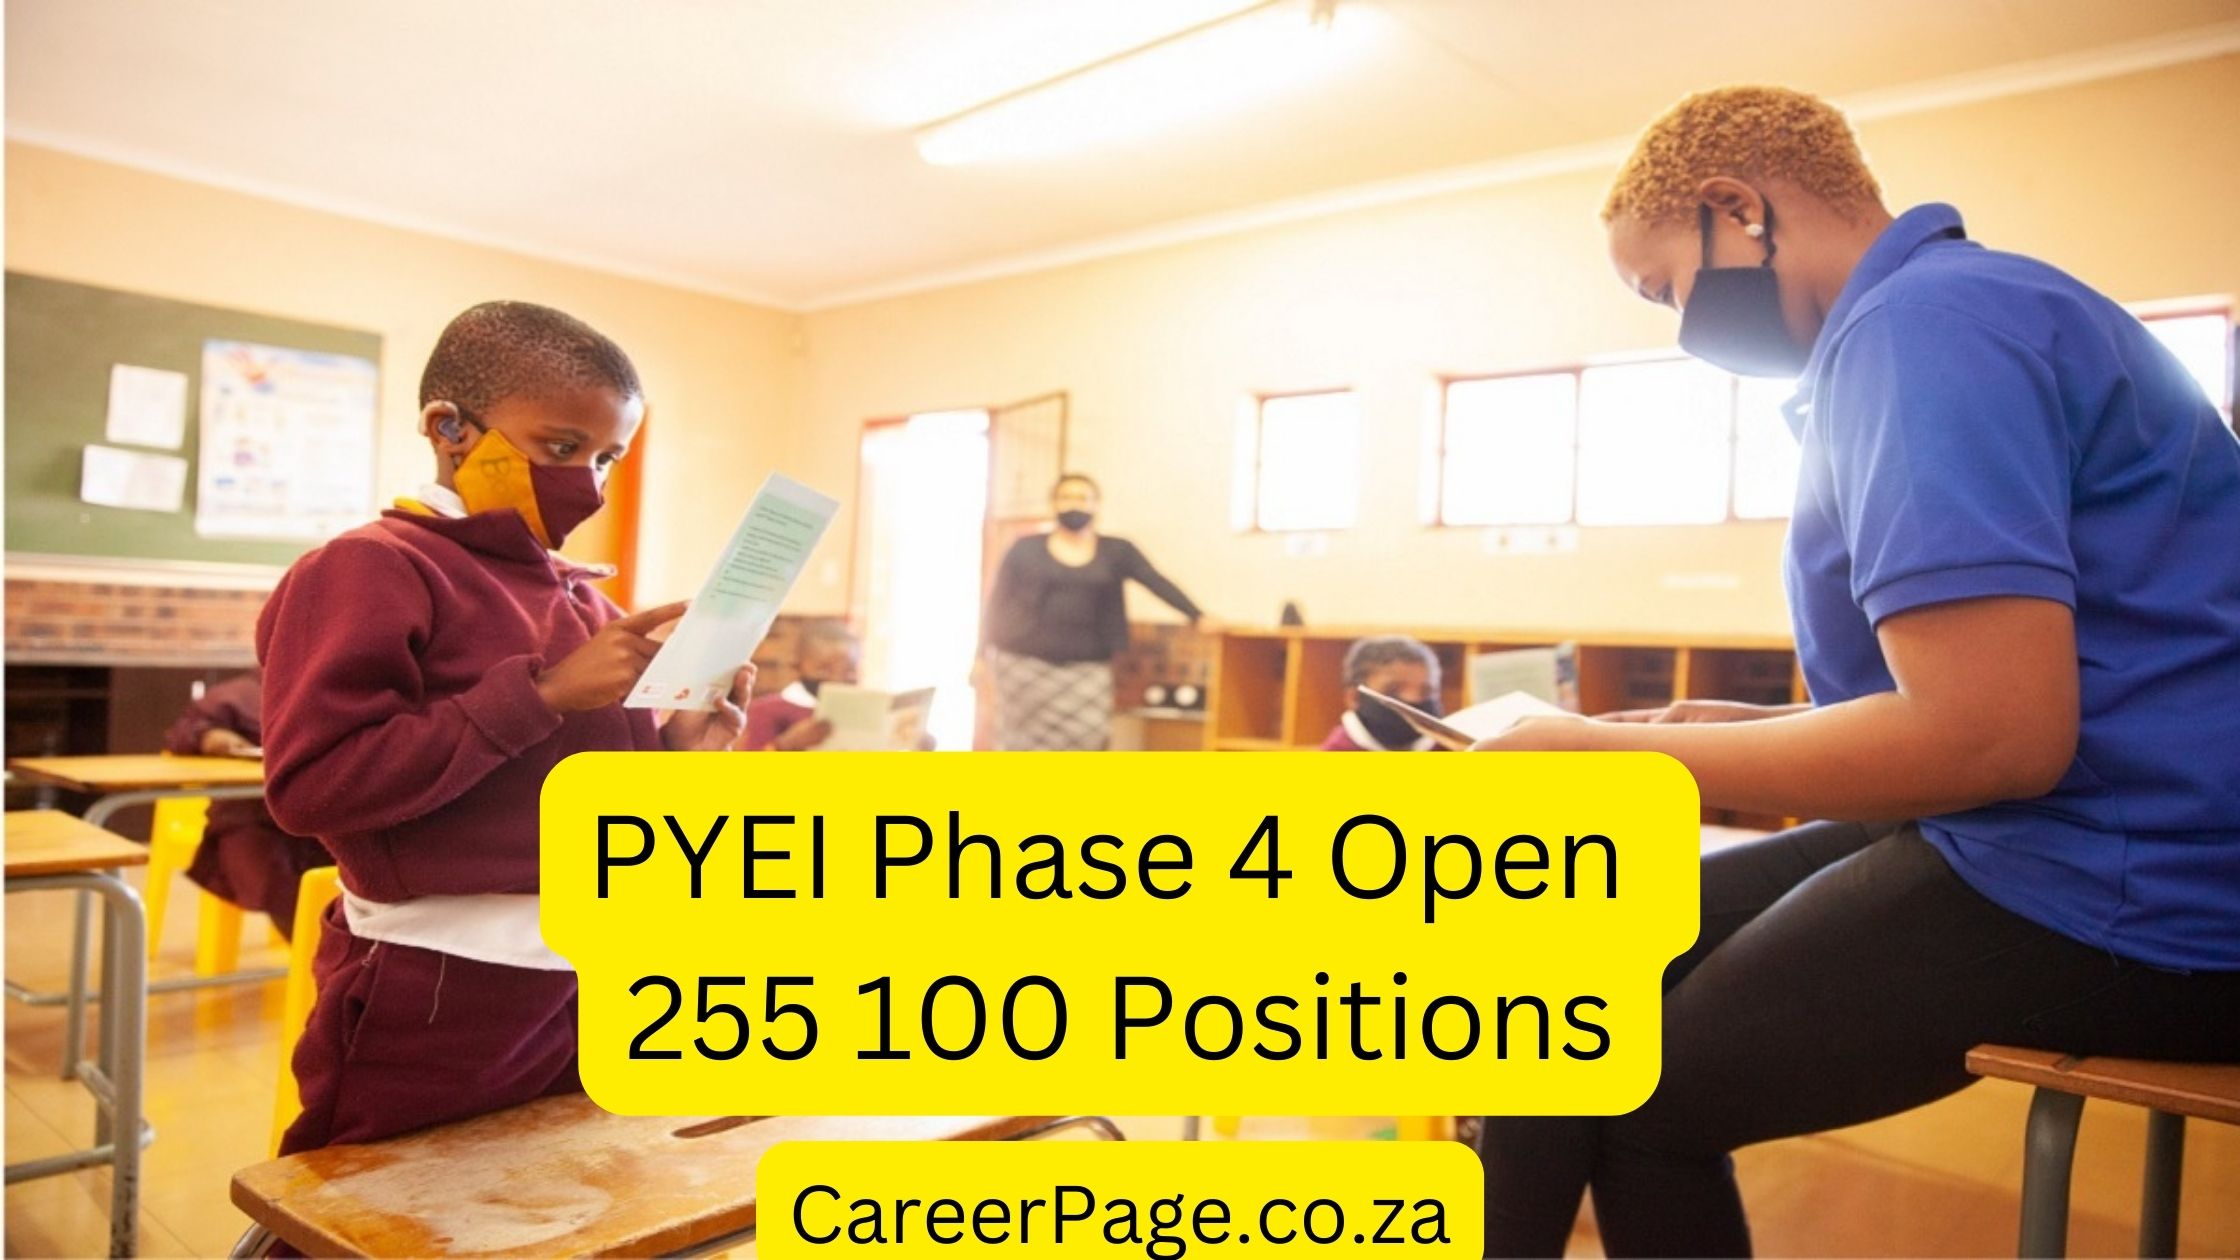 PYEI Phase 4 Open 255 100 Positions